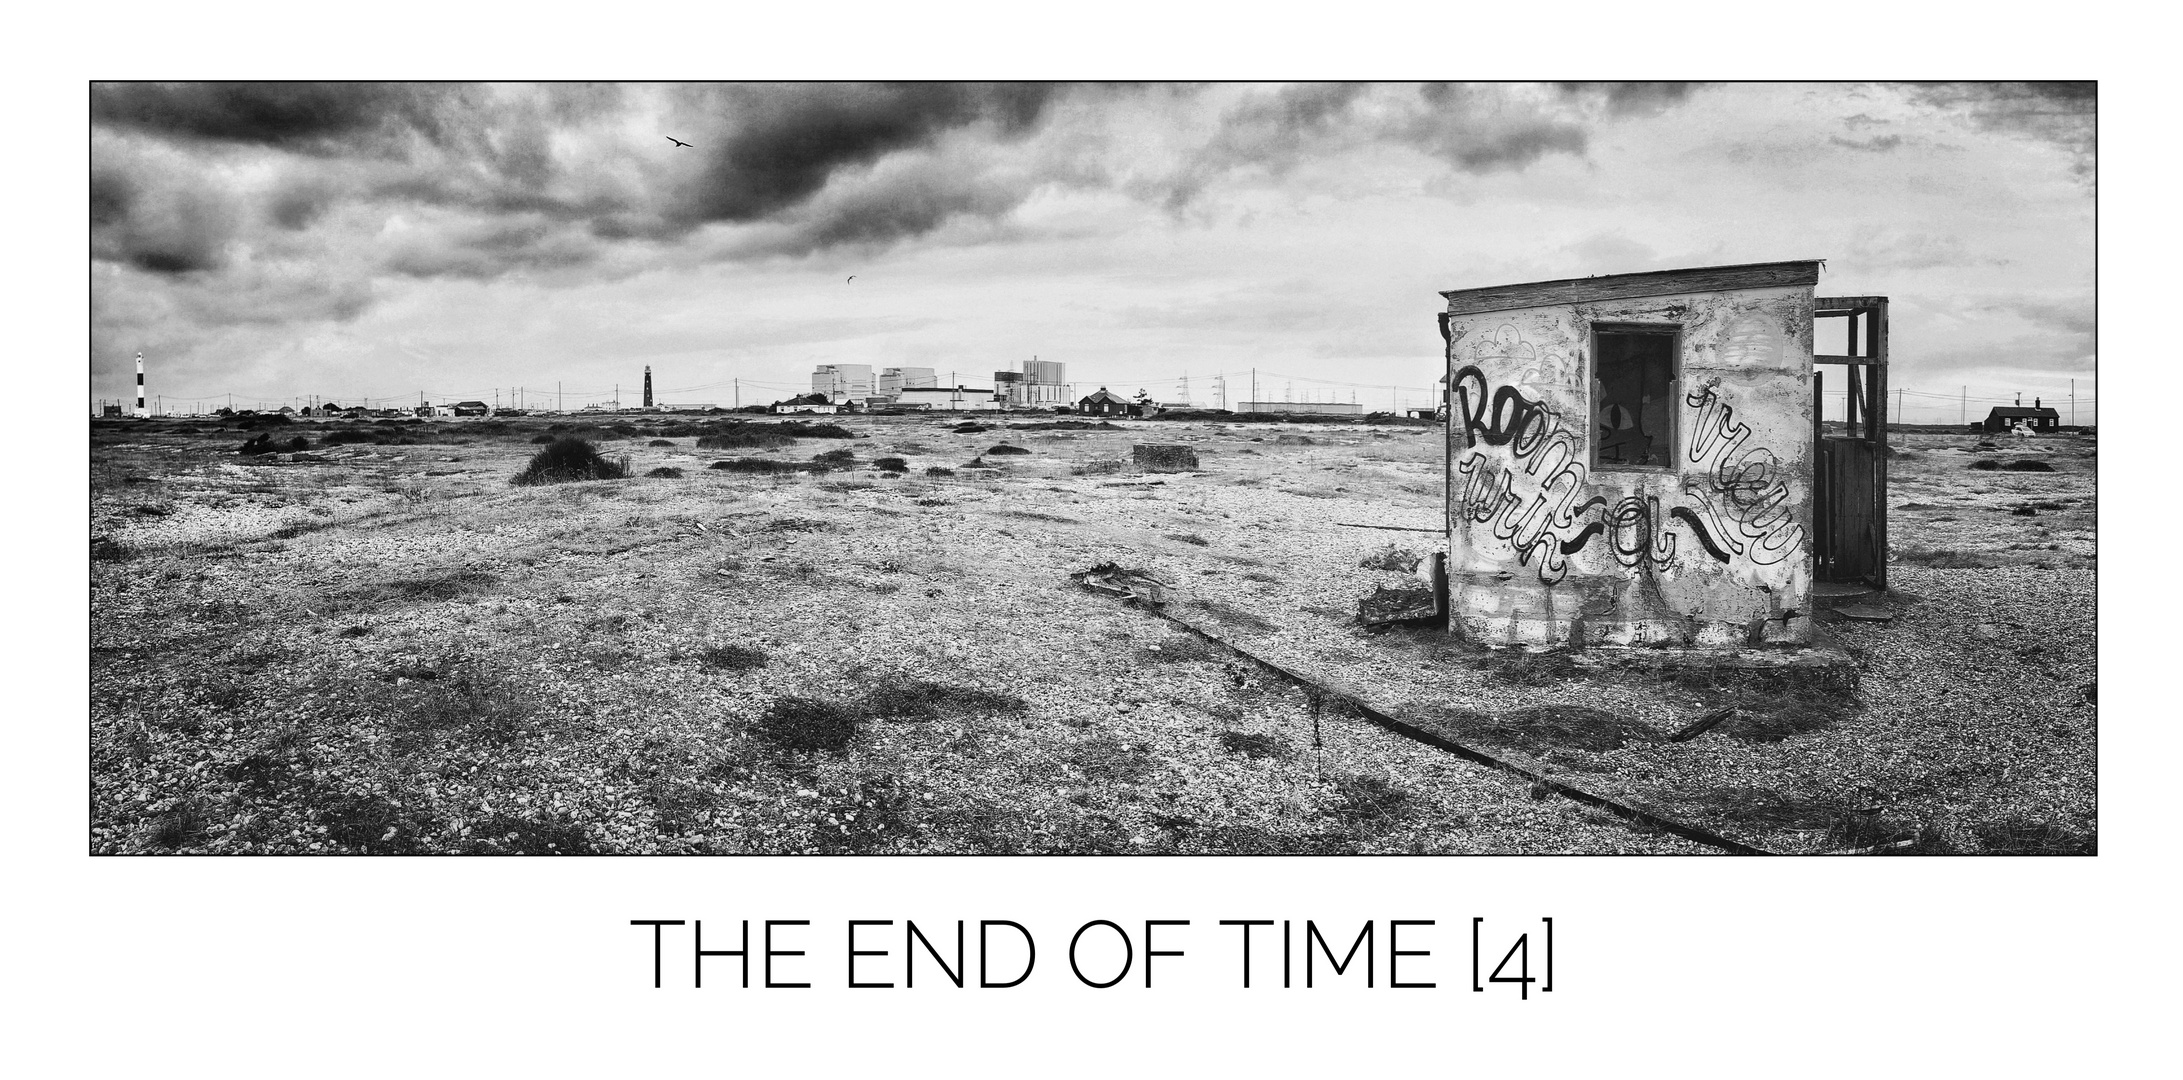 +++THE END OF TIME [4]+++